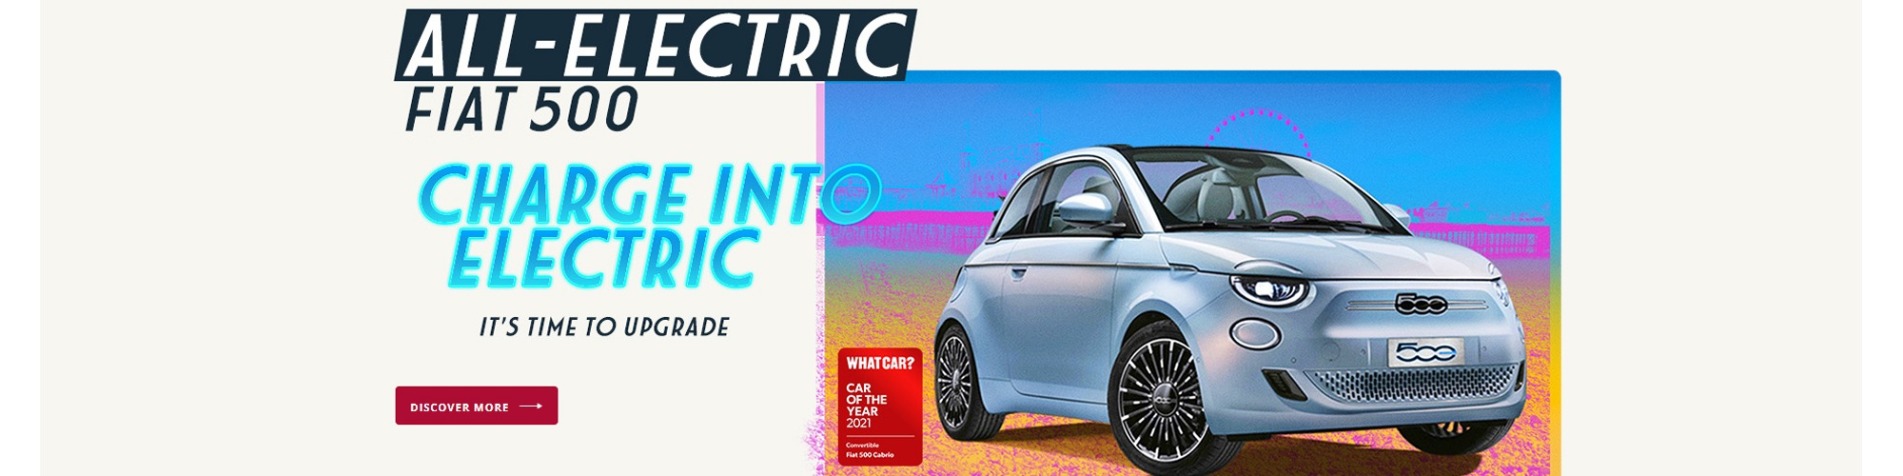 All New All Electric 500